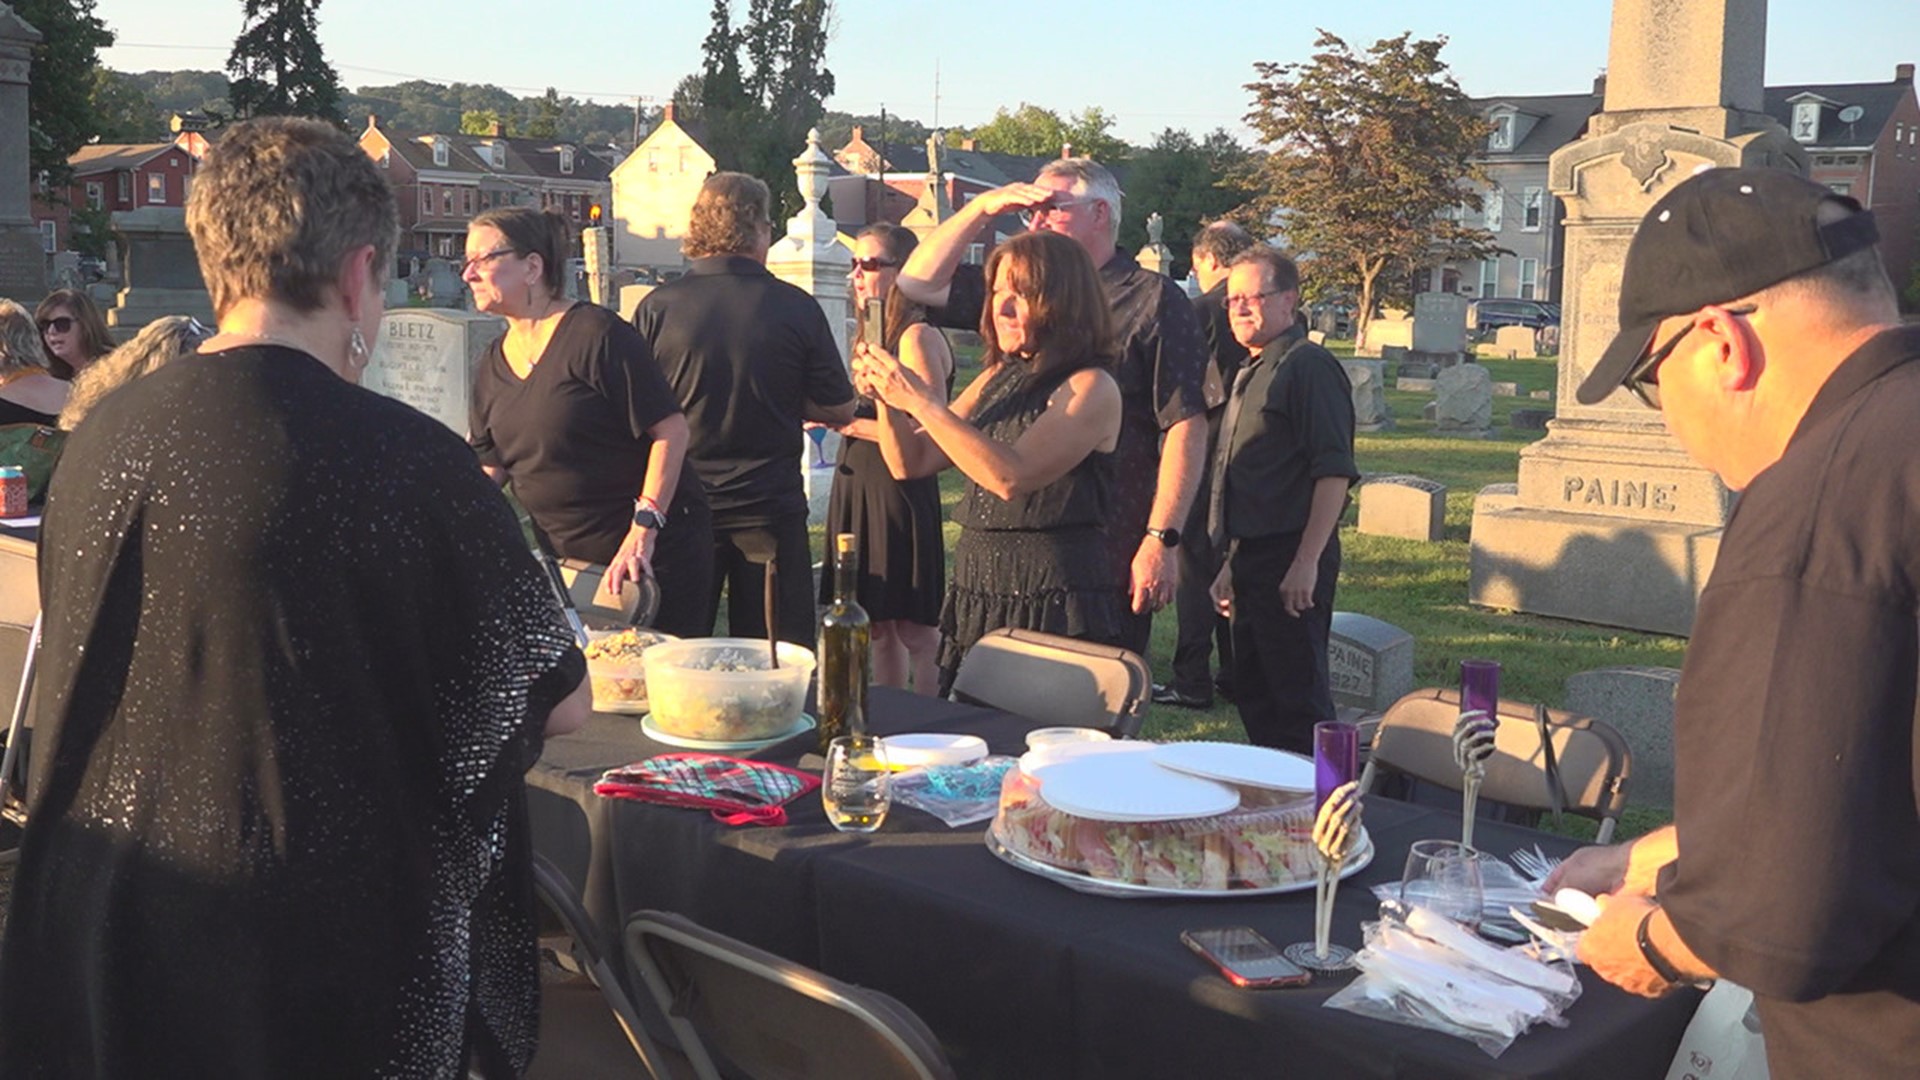 While the idea of partying in a cemetery sounds a bit strange, the event traces its roots back to the Victorian era.